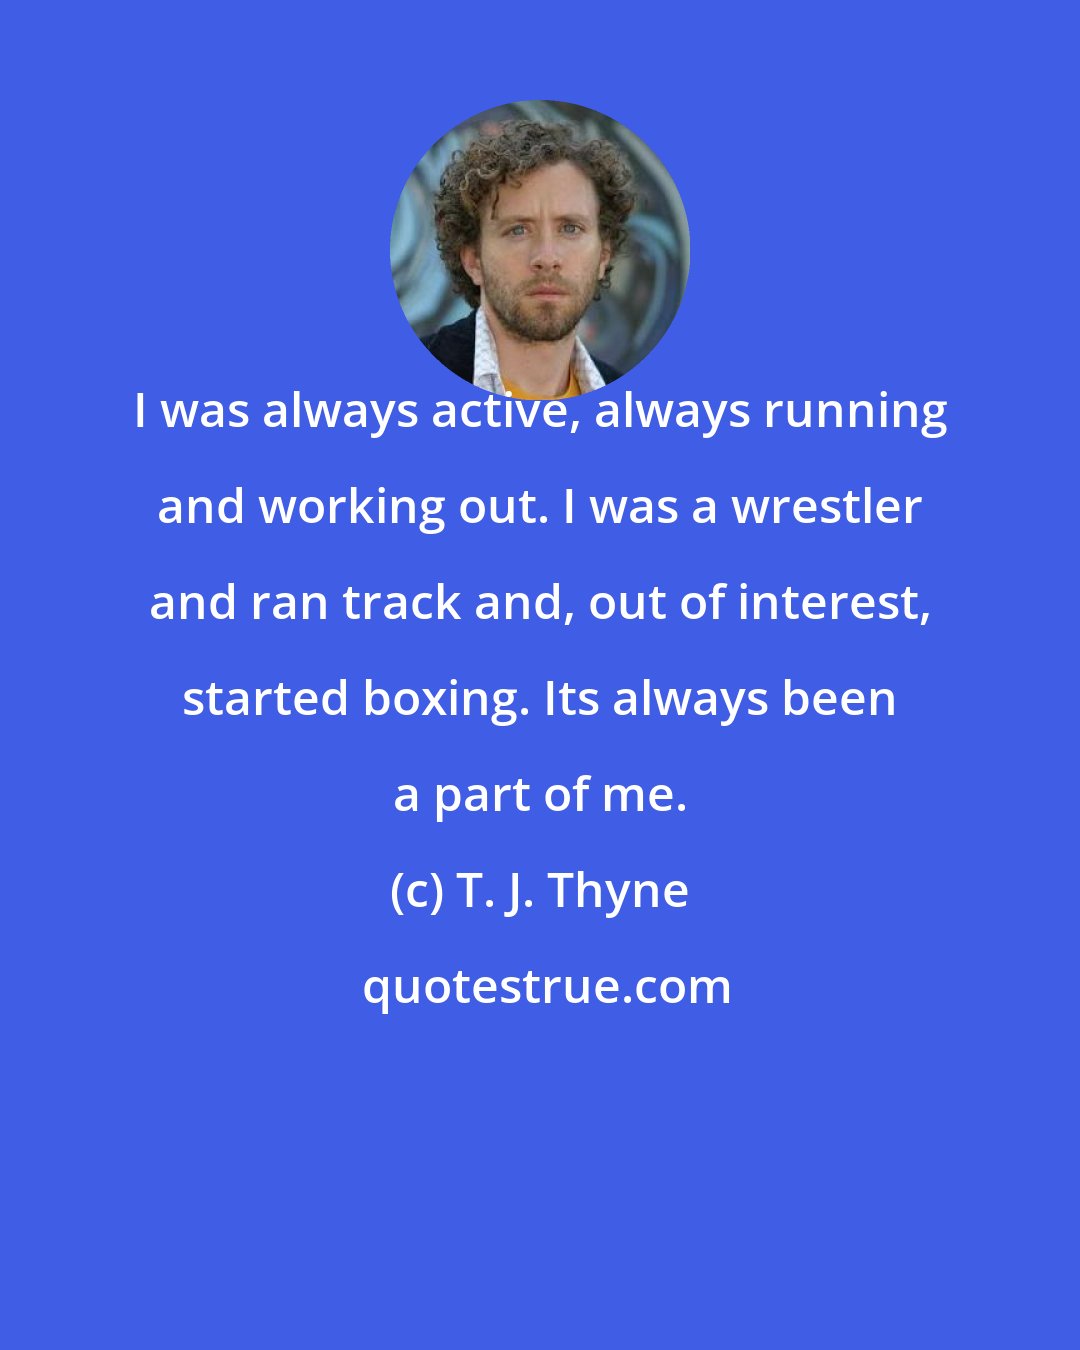 T. J. Thyne: I was always active, always running and working out. I was a wrestler and ran track and, out of interest, started boxing. Its always been a part of me.